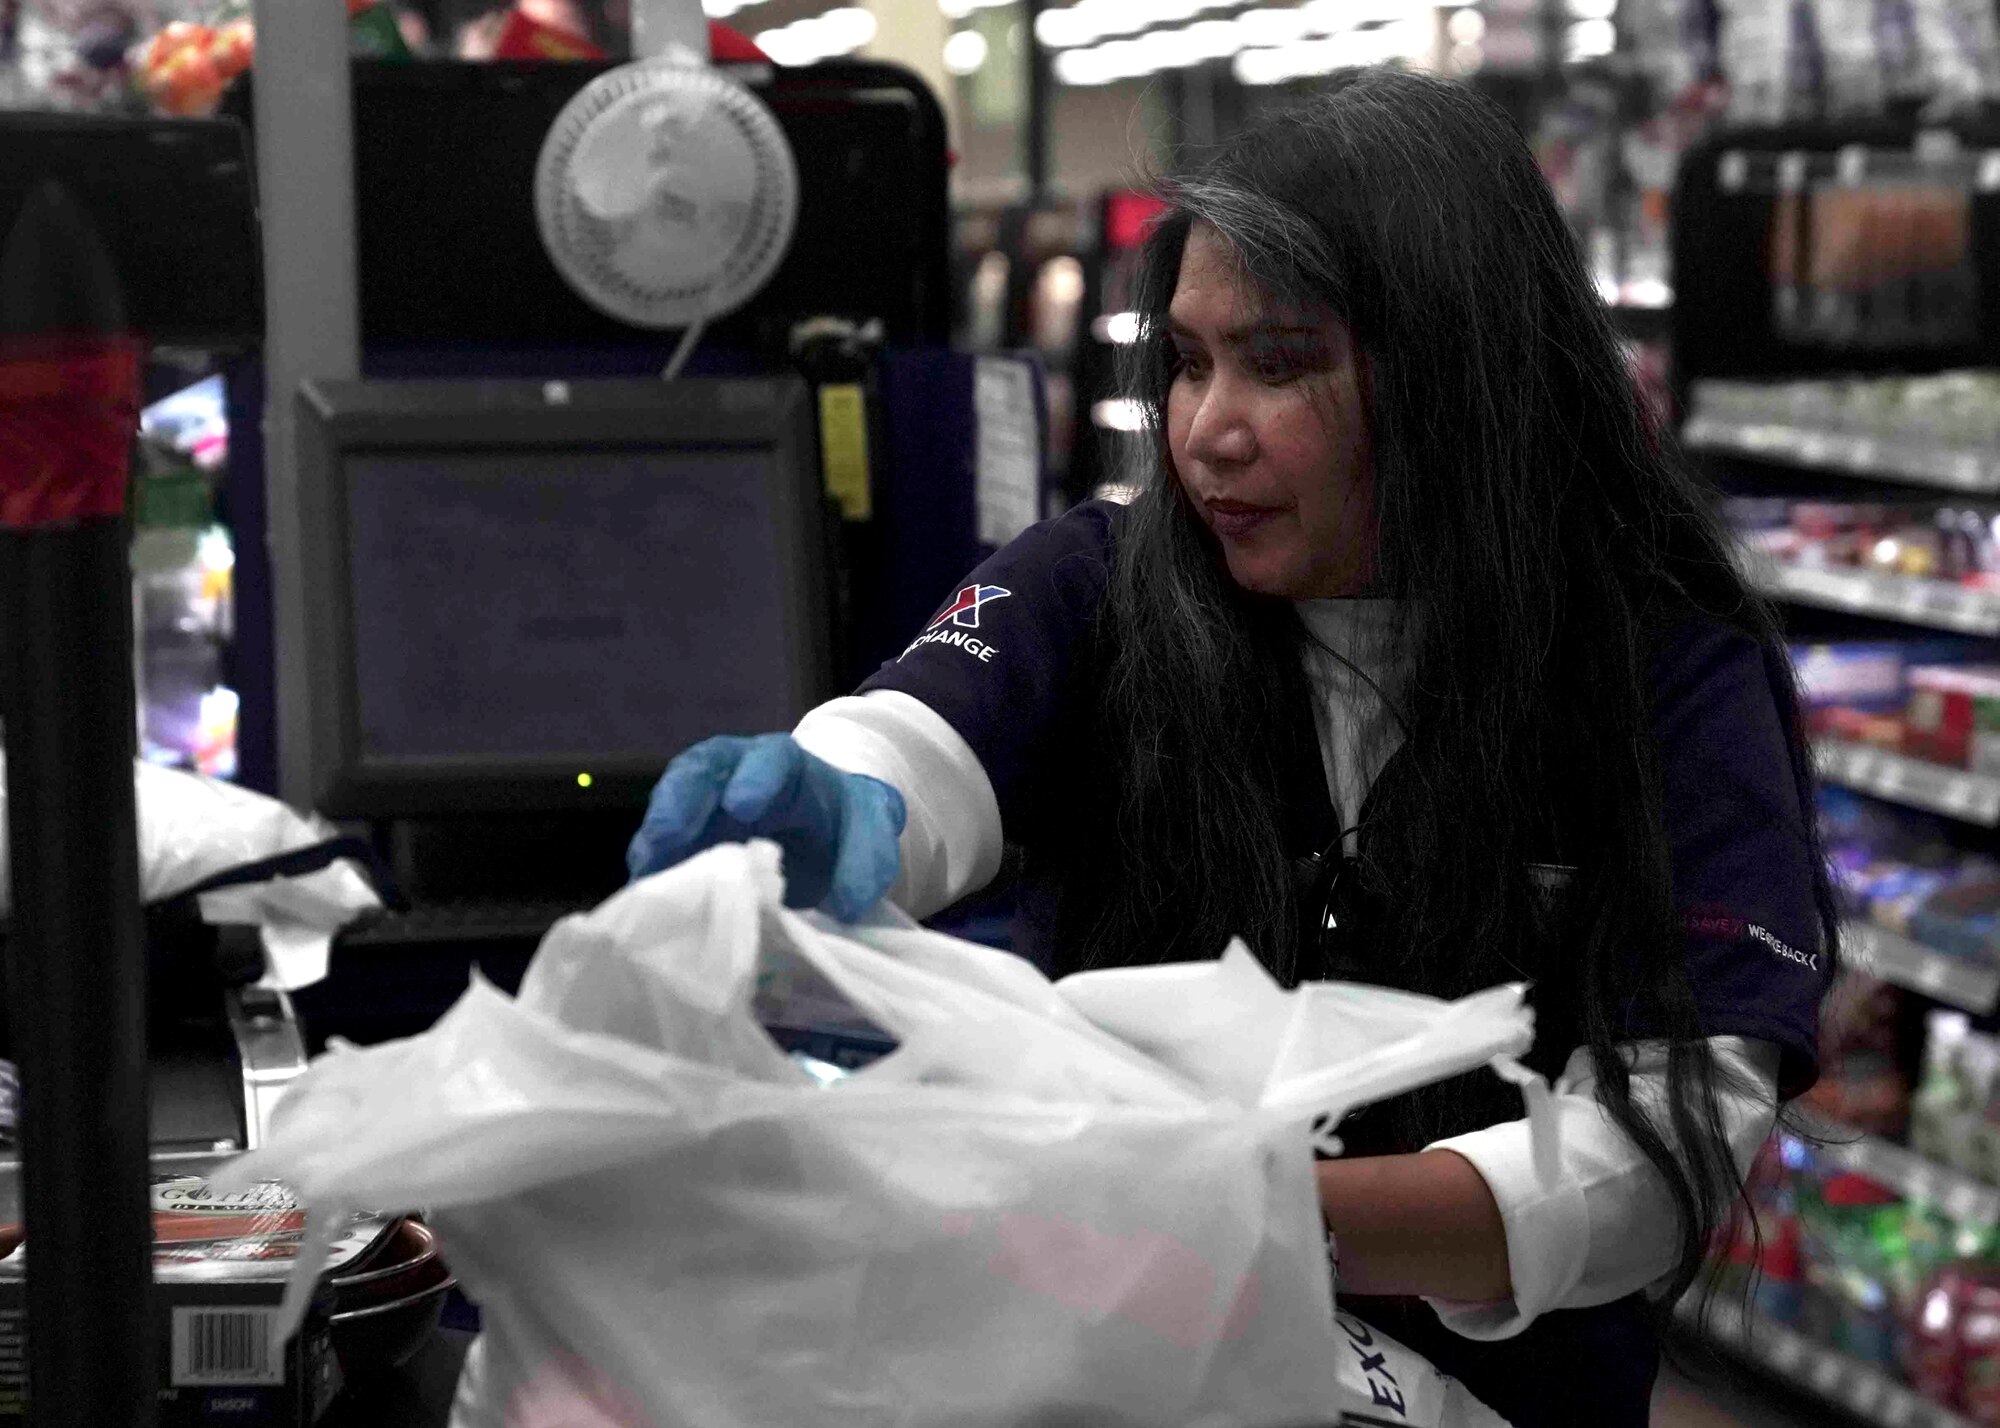 Josephine Rice, a cashier, packs a customer’s items at the Exchange on Nellis Air Force Base, Nevada, March 24, 2020. The Exchange staff cleans and sanitizes work areas more frequently to protect customers and employees during the COVID-19 pandemic. (U.S. Air Force photo by Senior Airman Stephanie Gelardo)